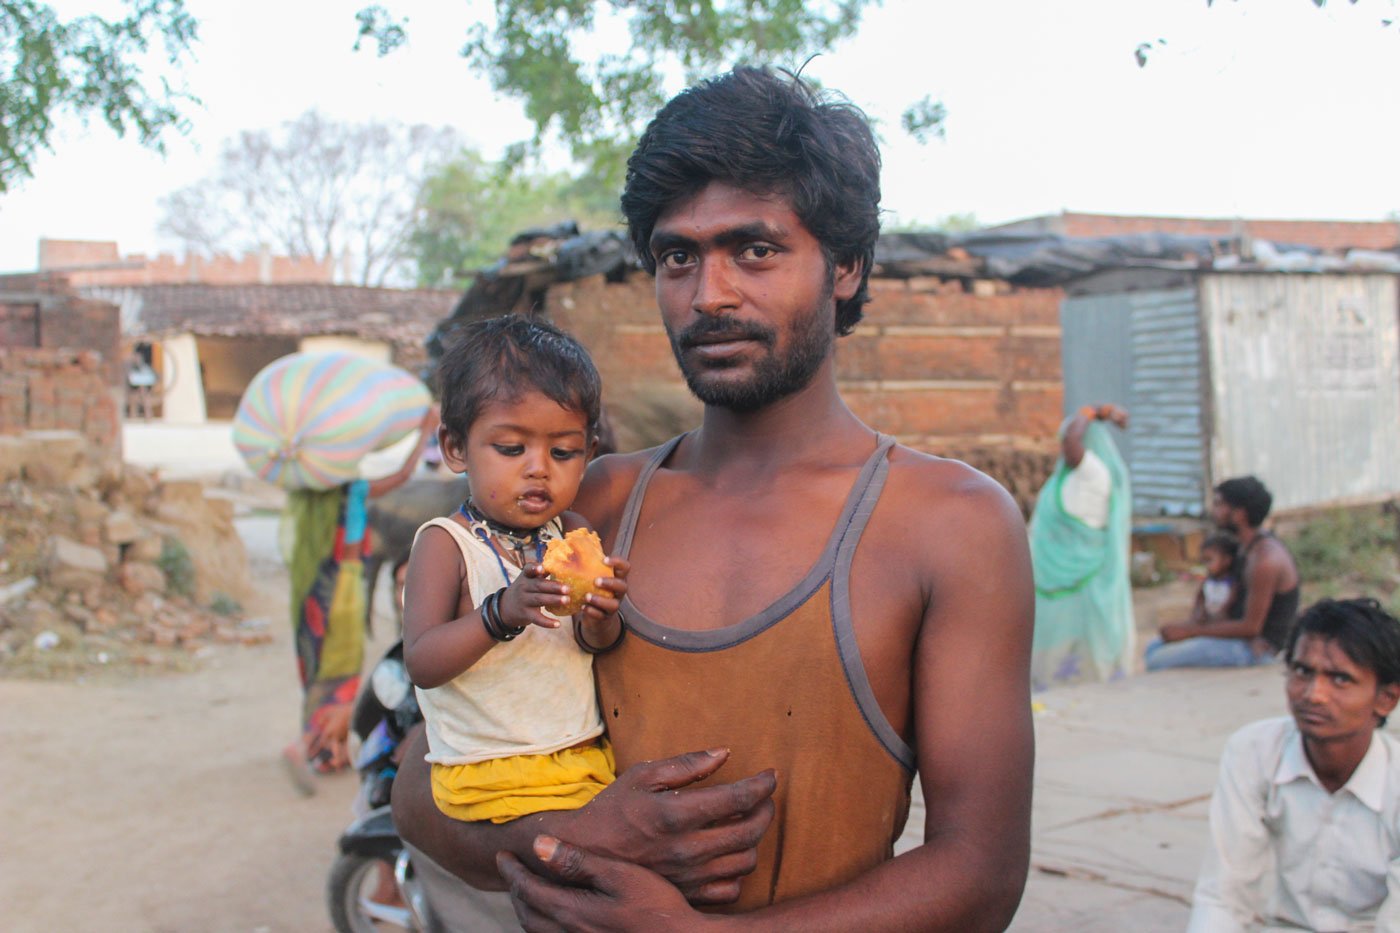 Boatman Chunnu Nishad with his daughter in Kewatra; he doesn't have a ration card even after applying for it thrice

